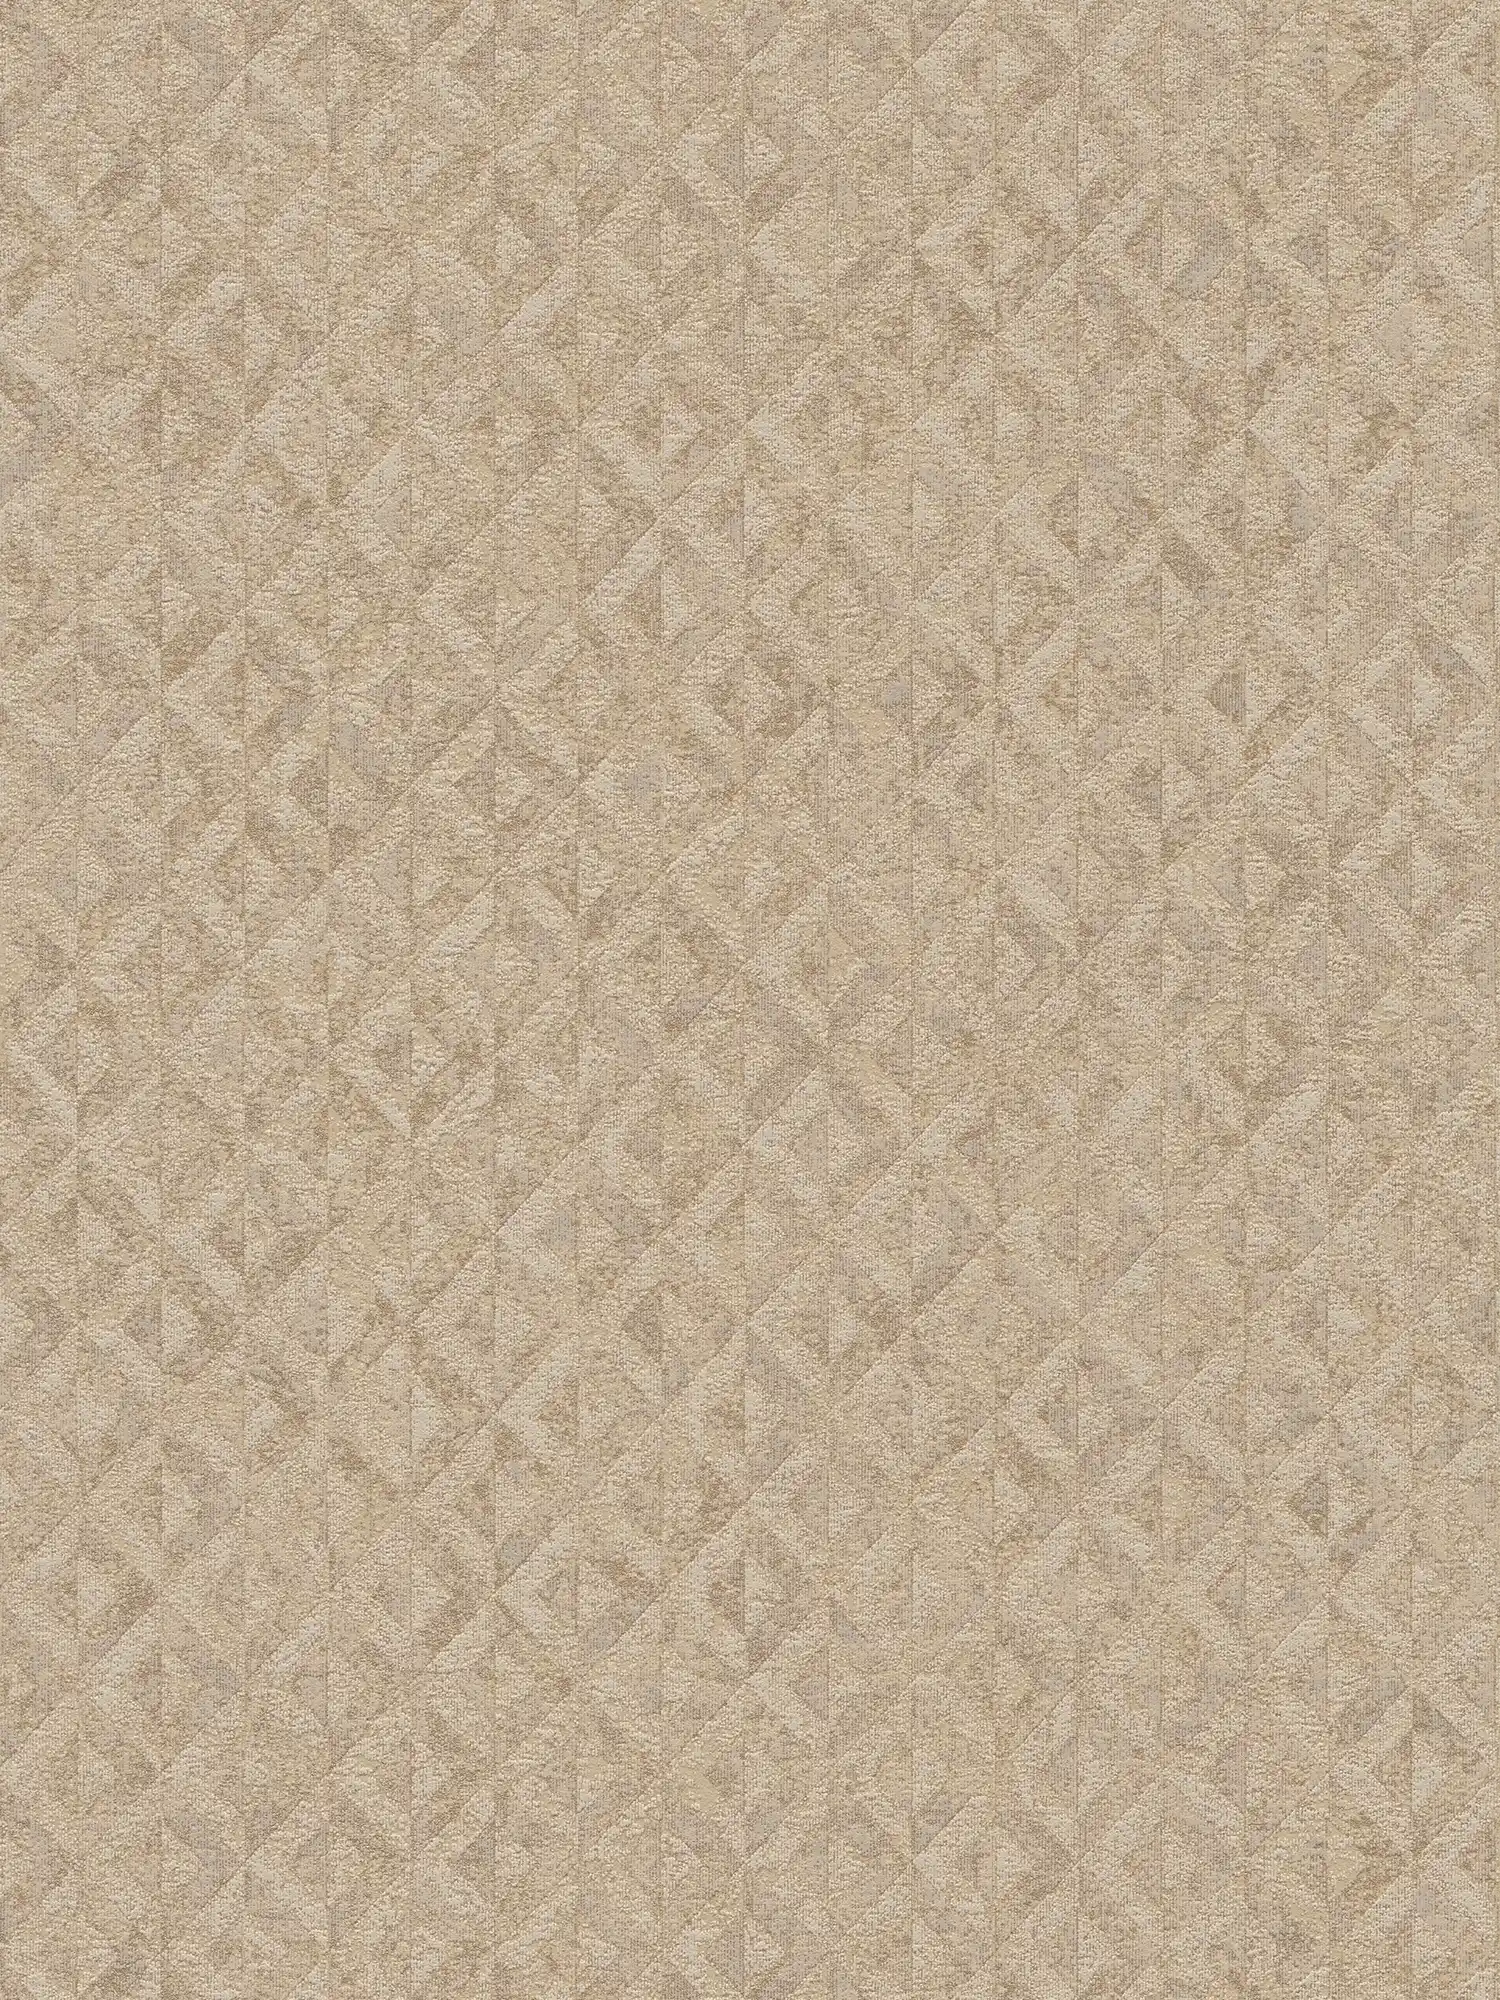 Pattern wallpaper with abstract design - beige, gold
